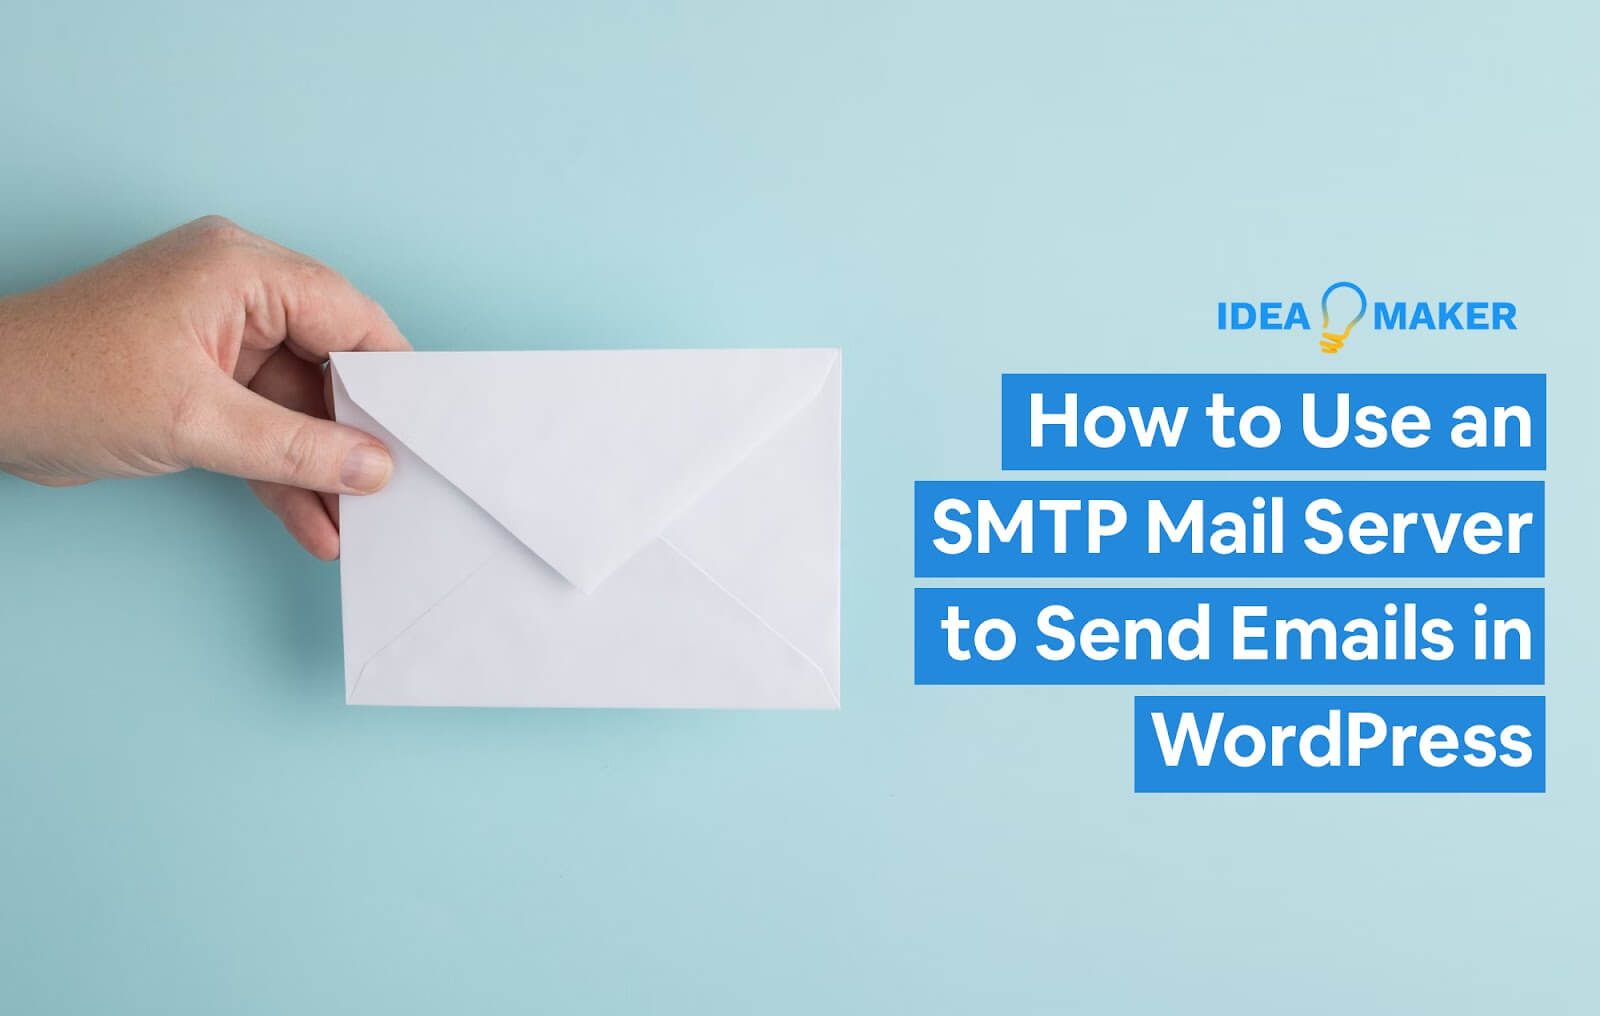 How to Use an SMTP Mail Server to Send Emails in WordPress